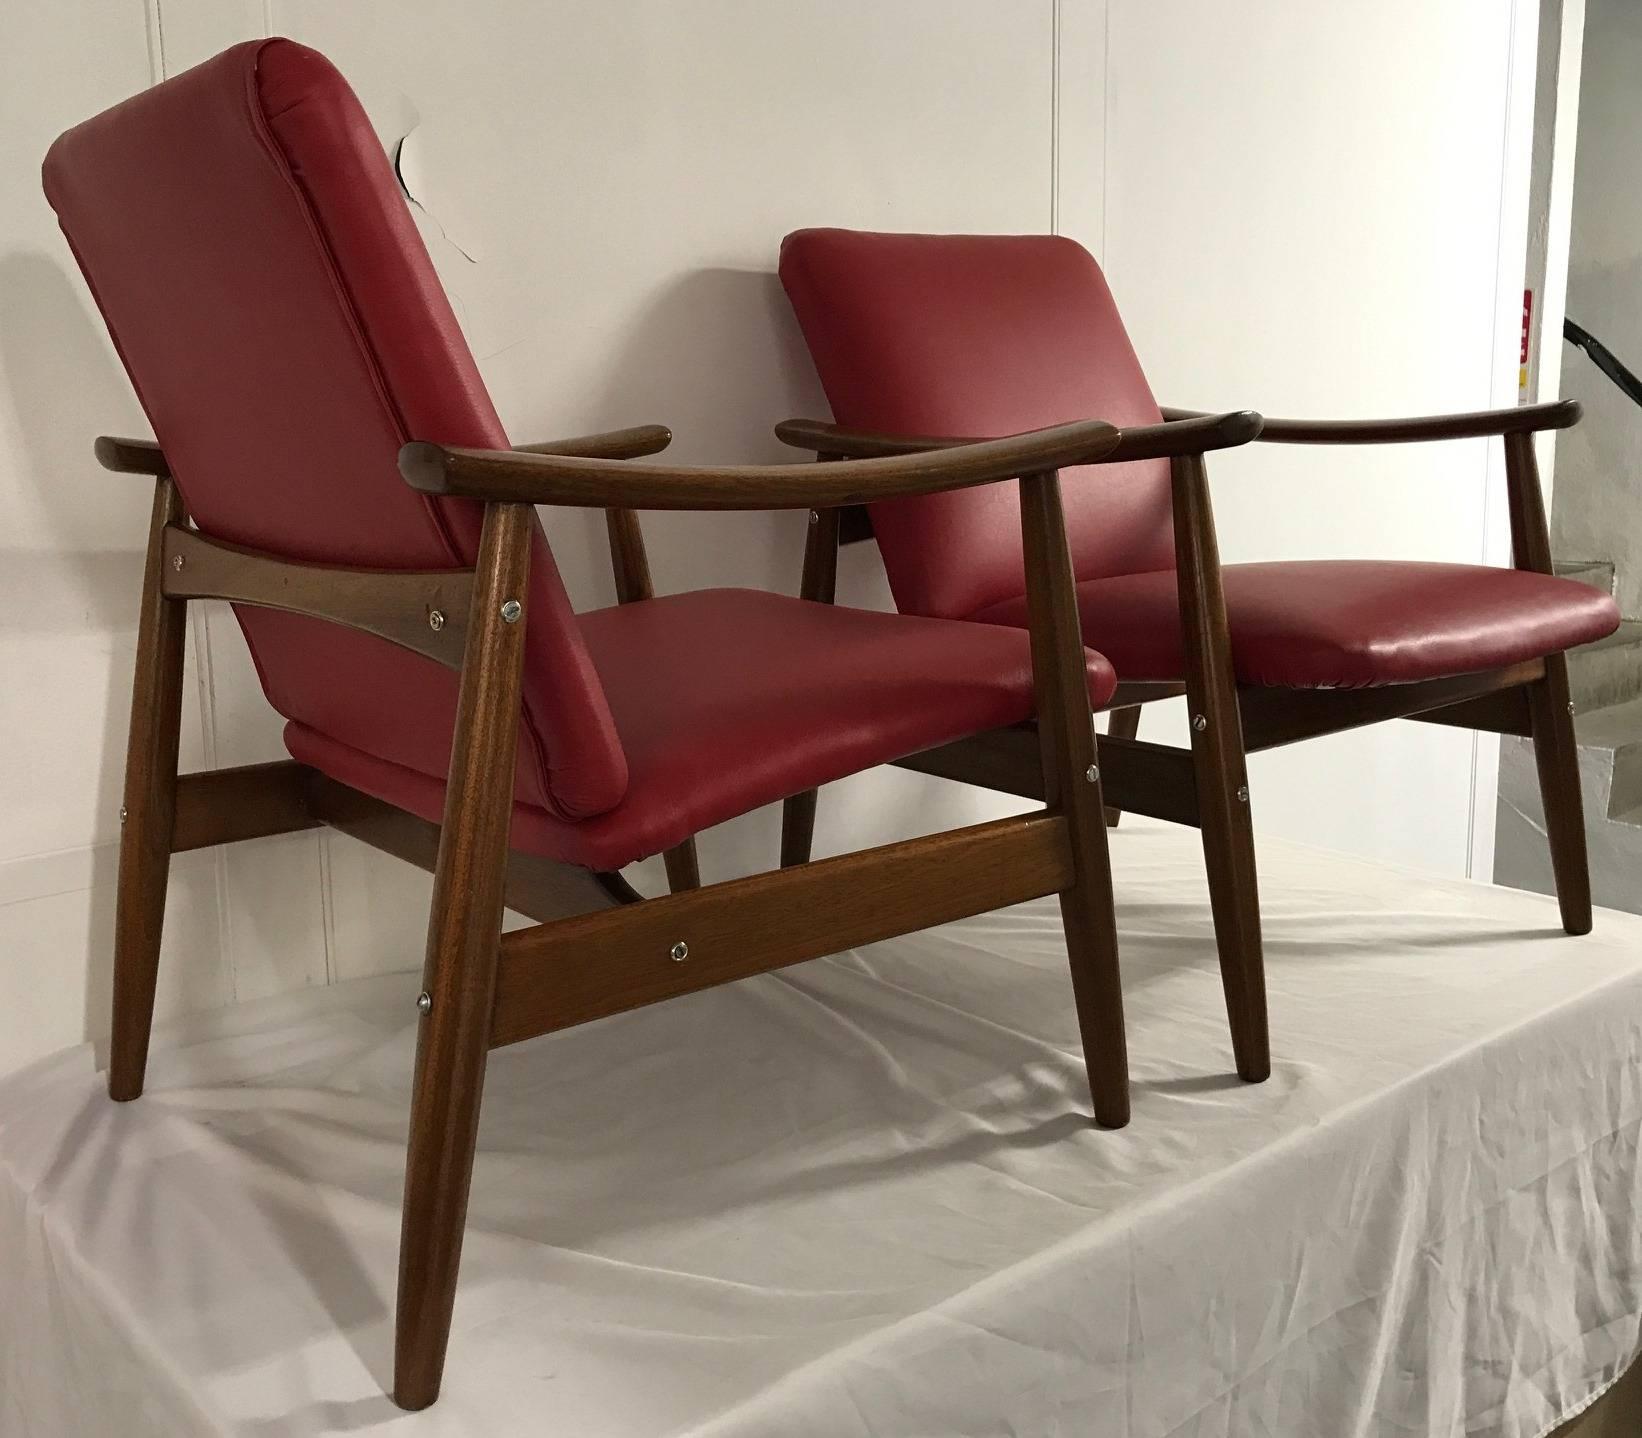 Mid-20th Century Pair of Armchairs by Altamira, Portugal, 1960s